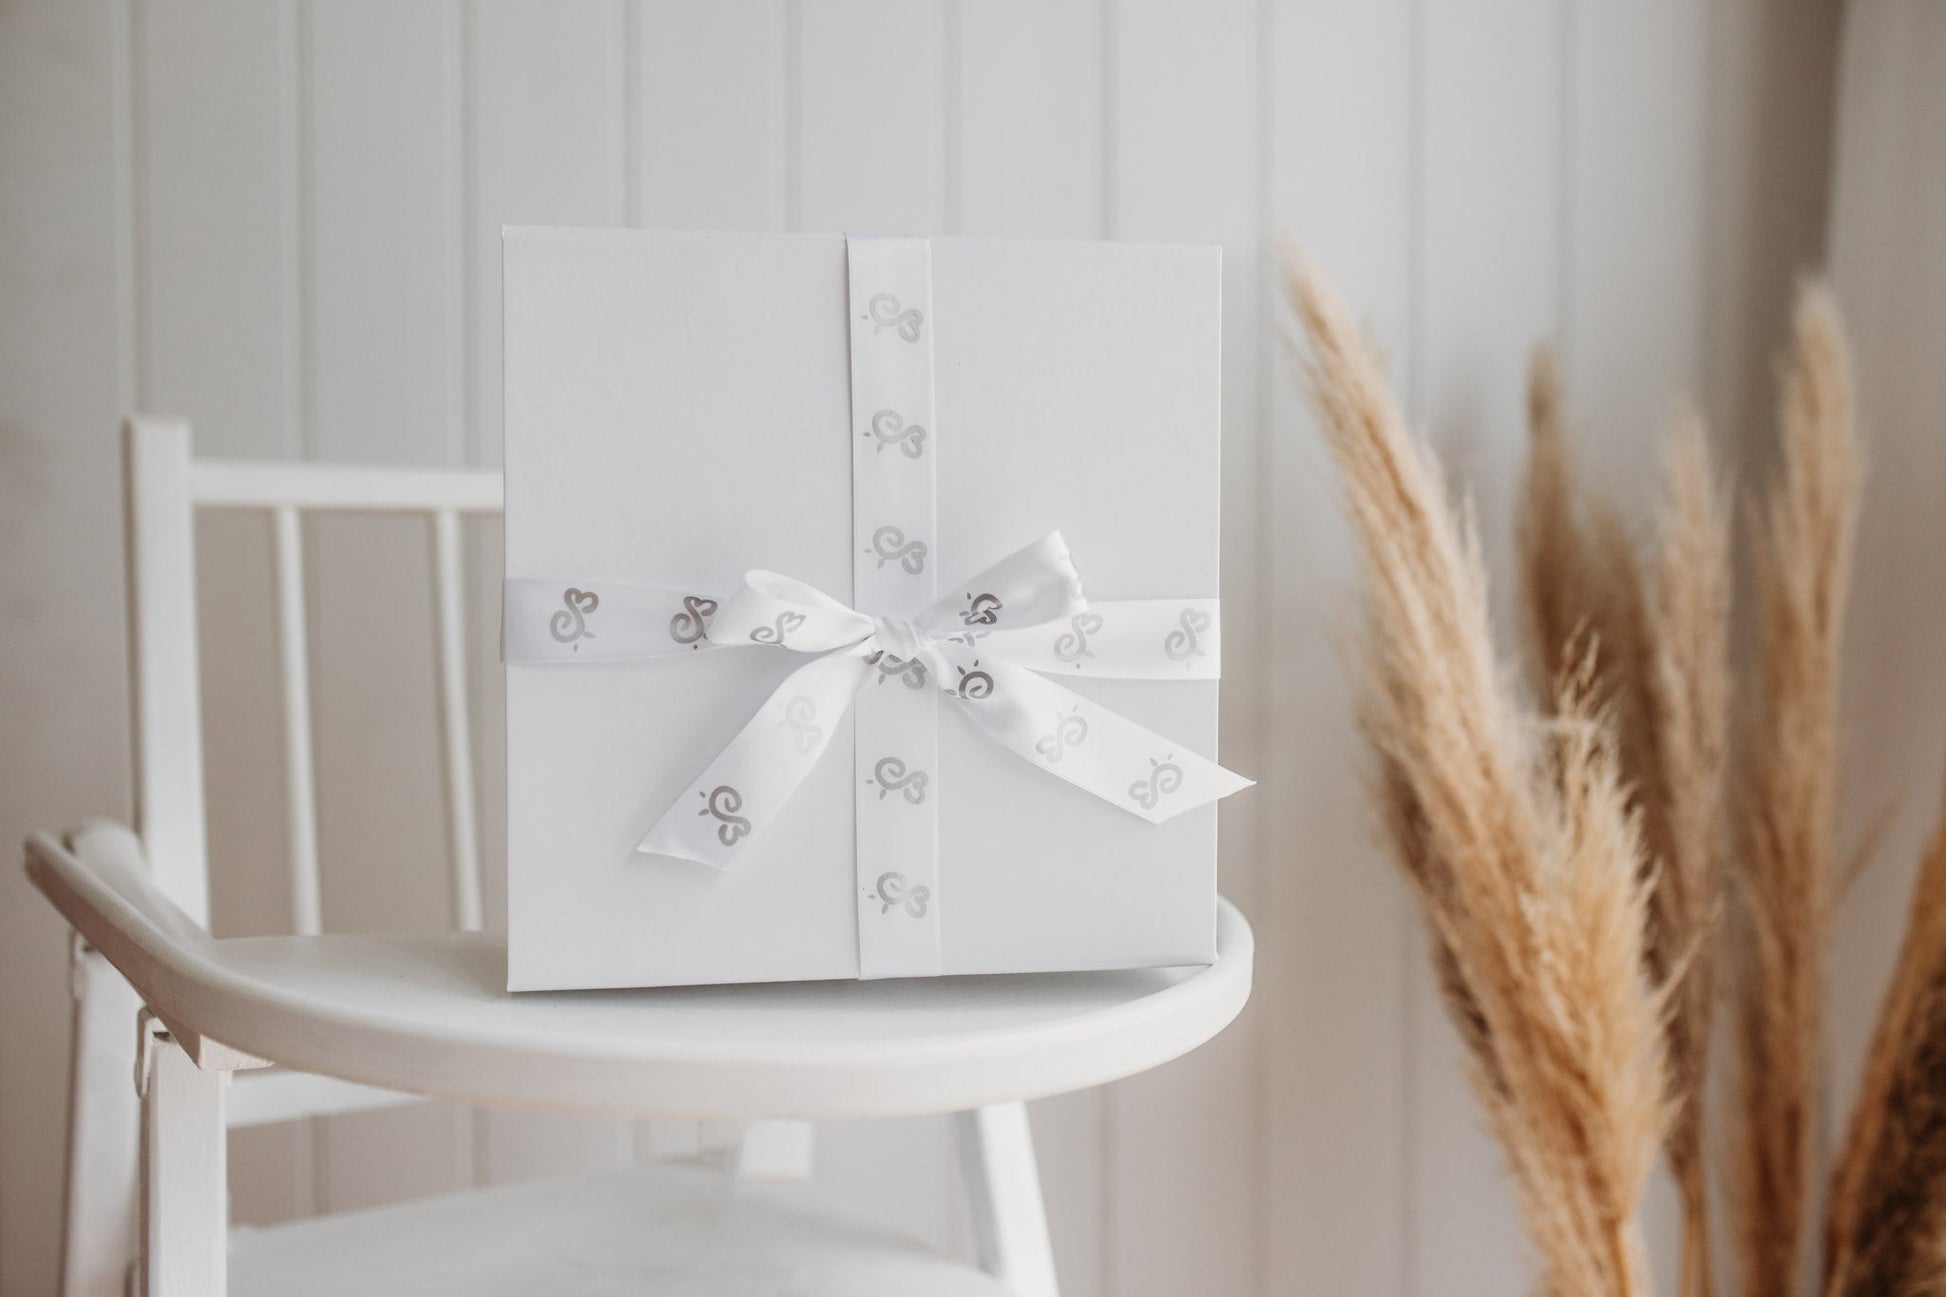 luxury white gloss gift box and wrapping with sati bumbleberry park branded ribbon on a baby's highchair in a nursery